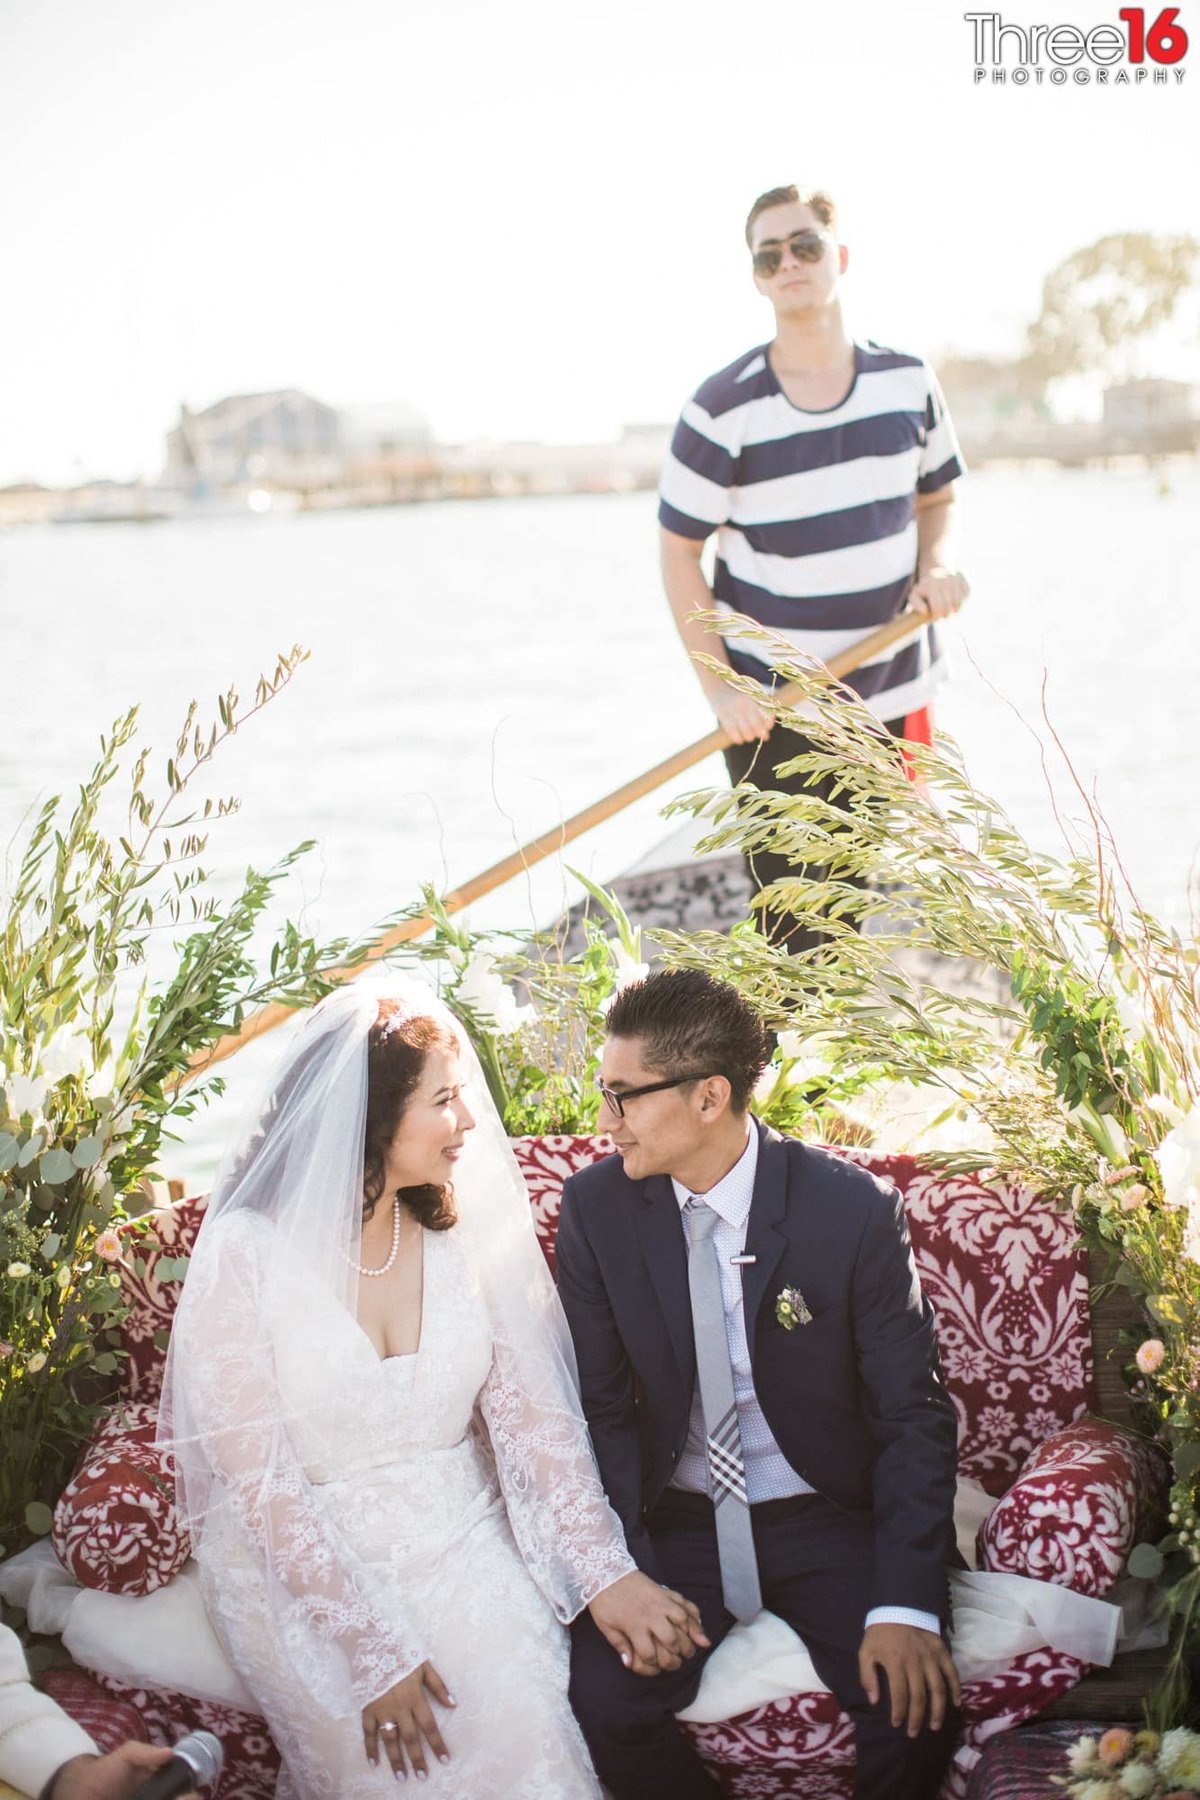 Bride and Groom sit holding hands and gazing at each other on a gondola ride with driver in the back